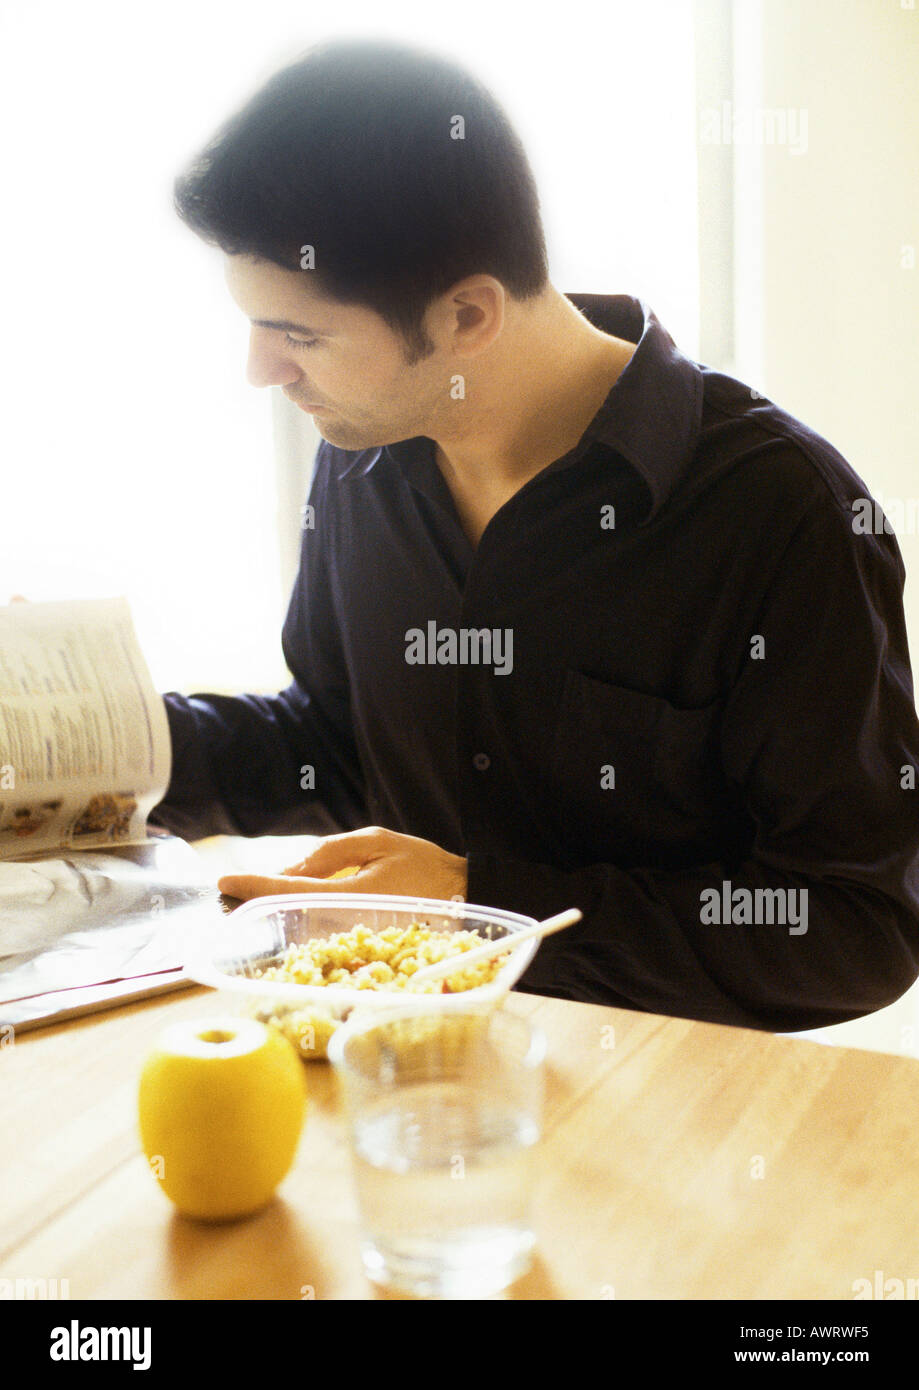 Man reading and eating Stock Photo